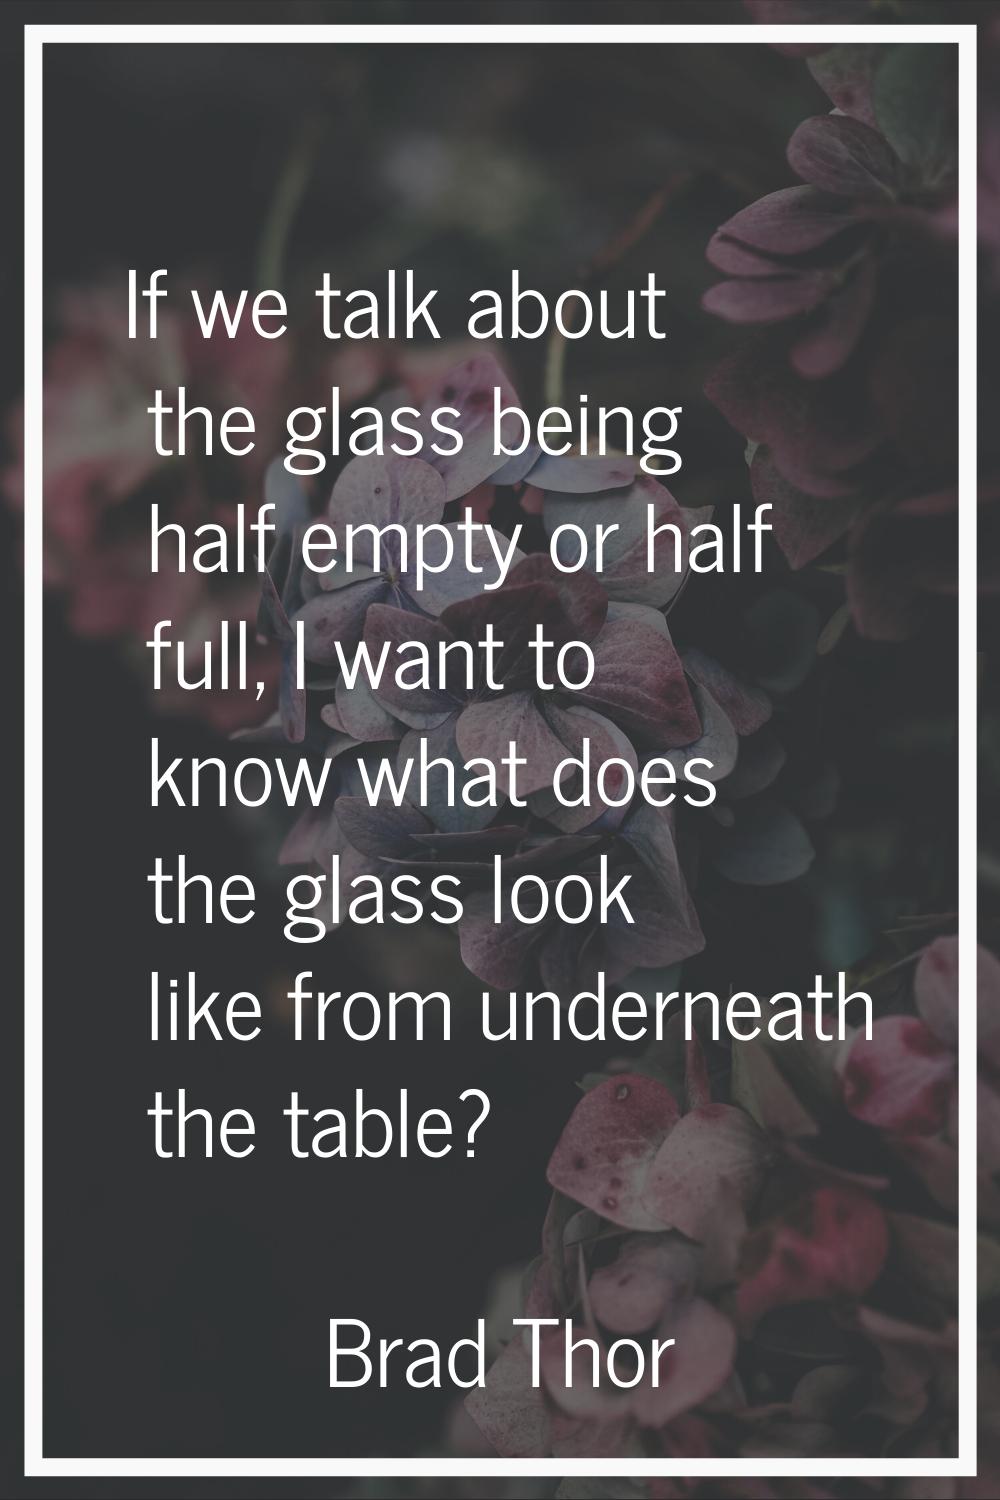 If we talk about the glass being half empty or half full, I want to know what does the glass look l